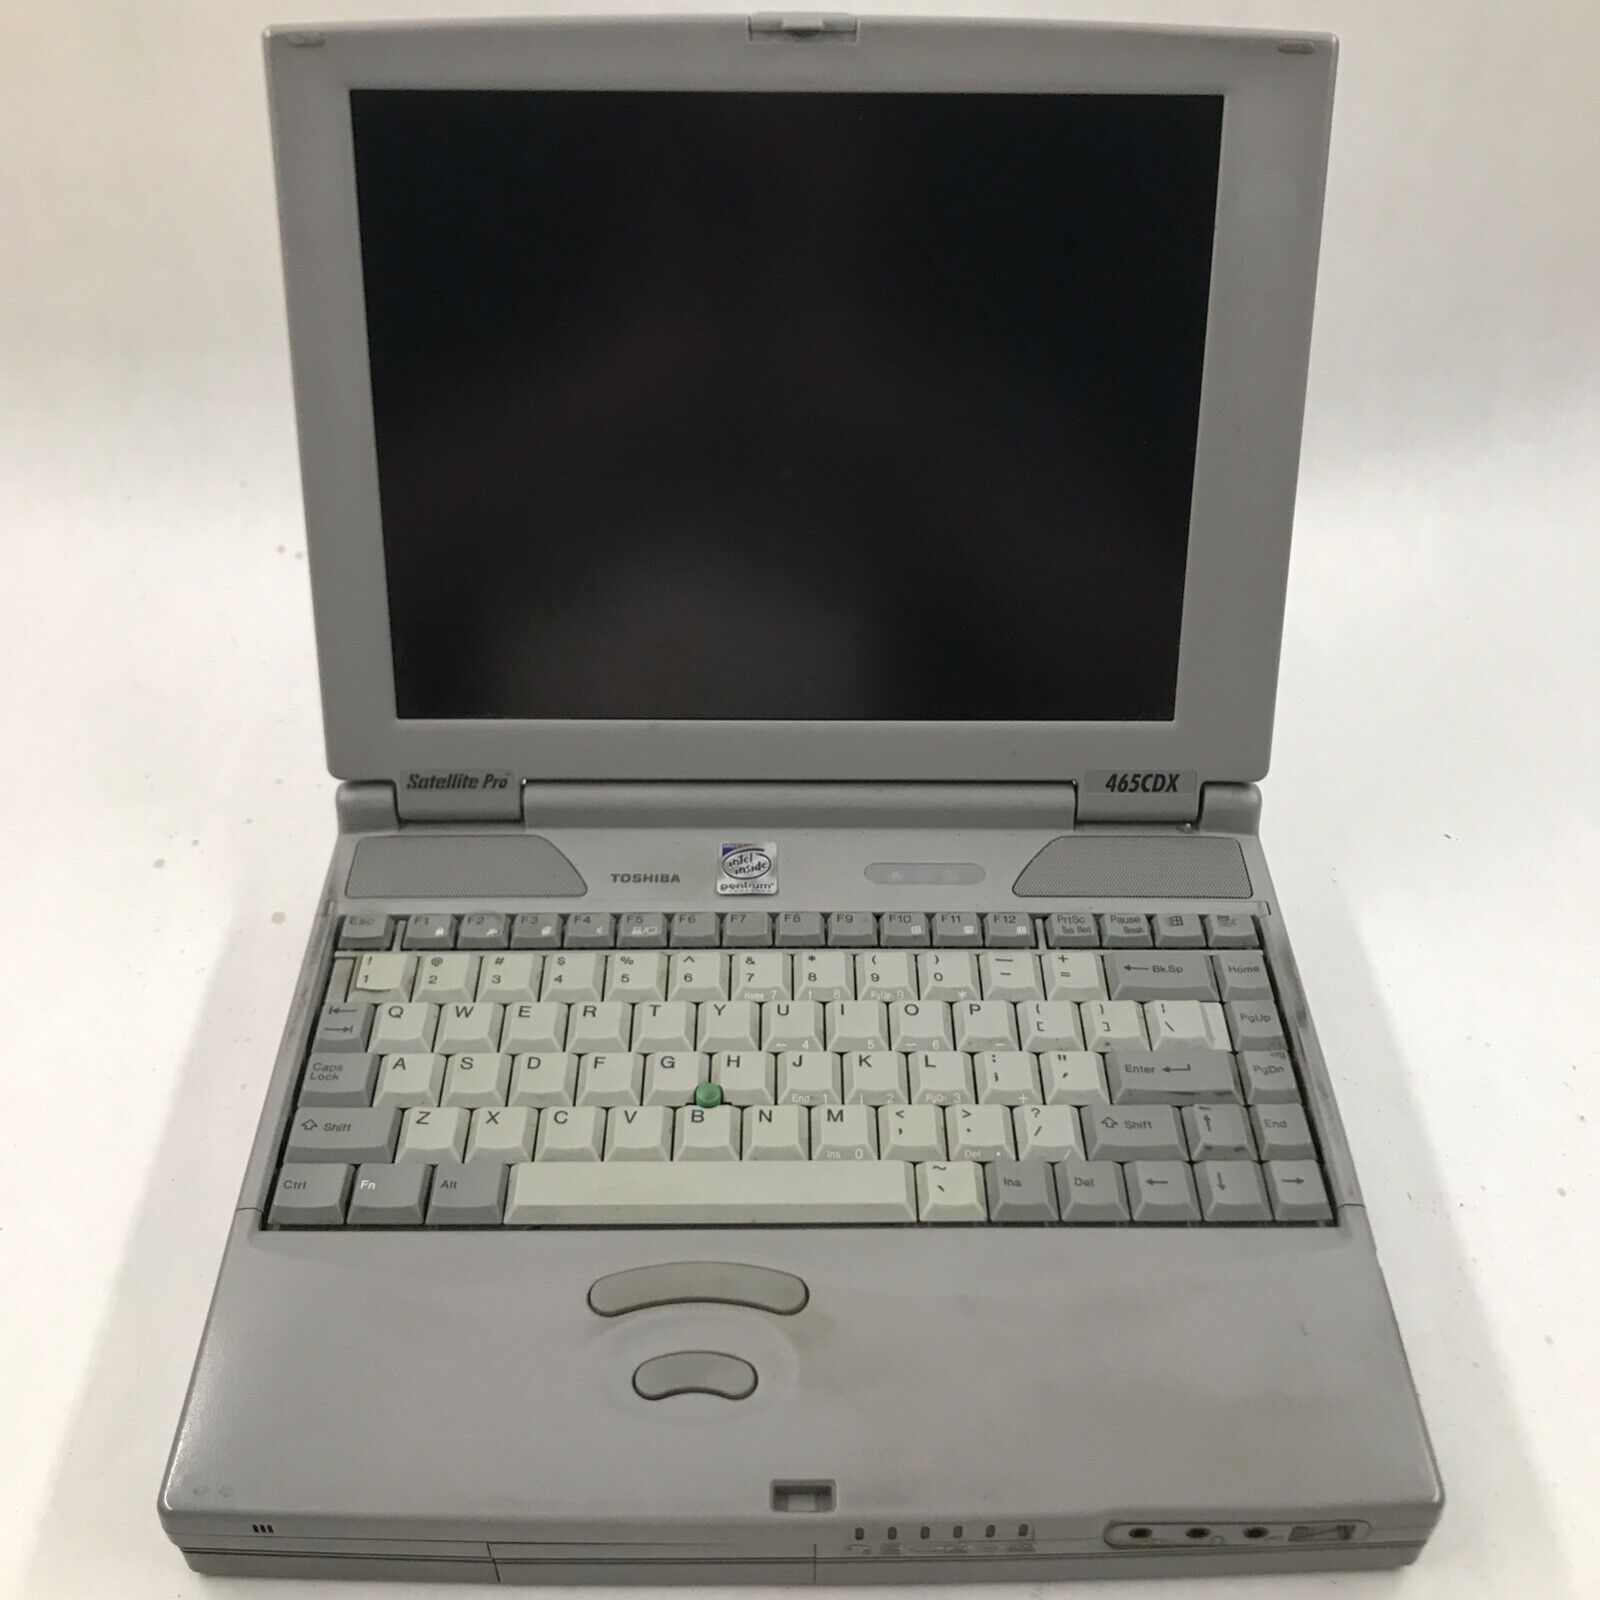 Vintage and Rare Toshiba Satellite Pro 465CDX PA1251U VCDM For Parts Untested